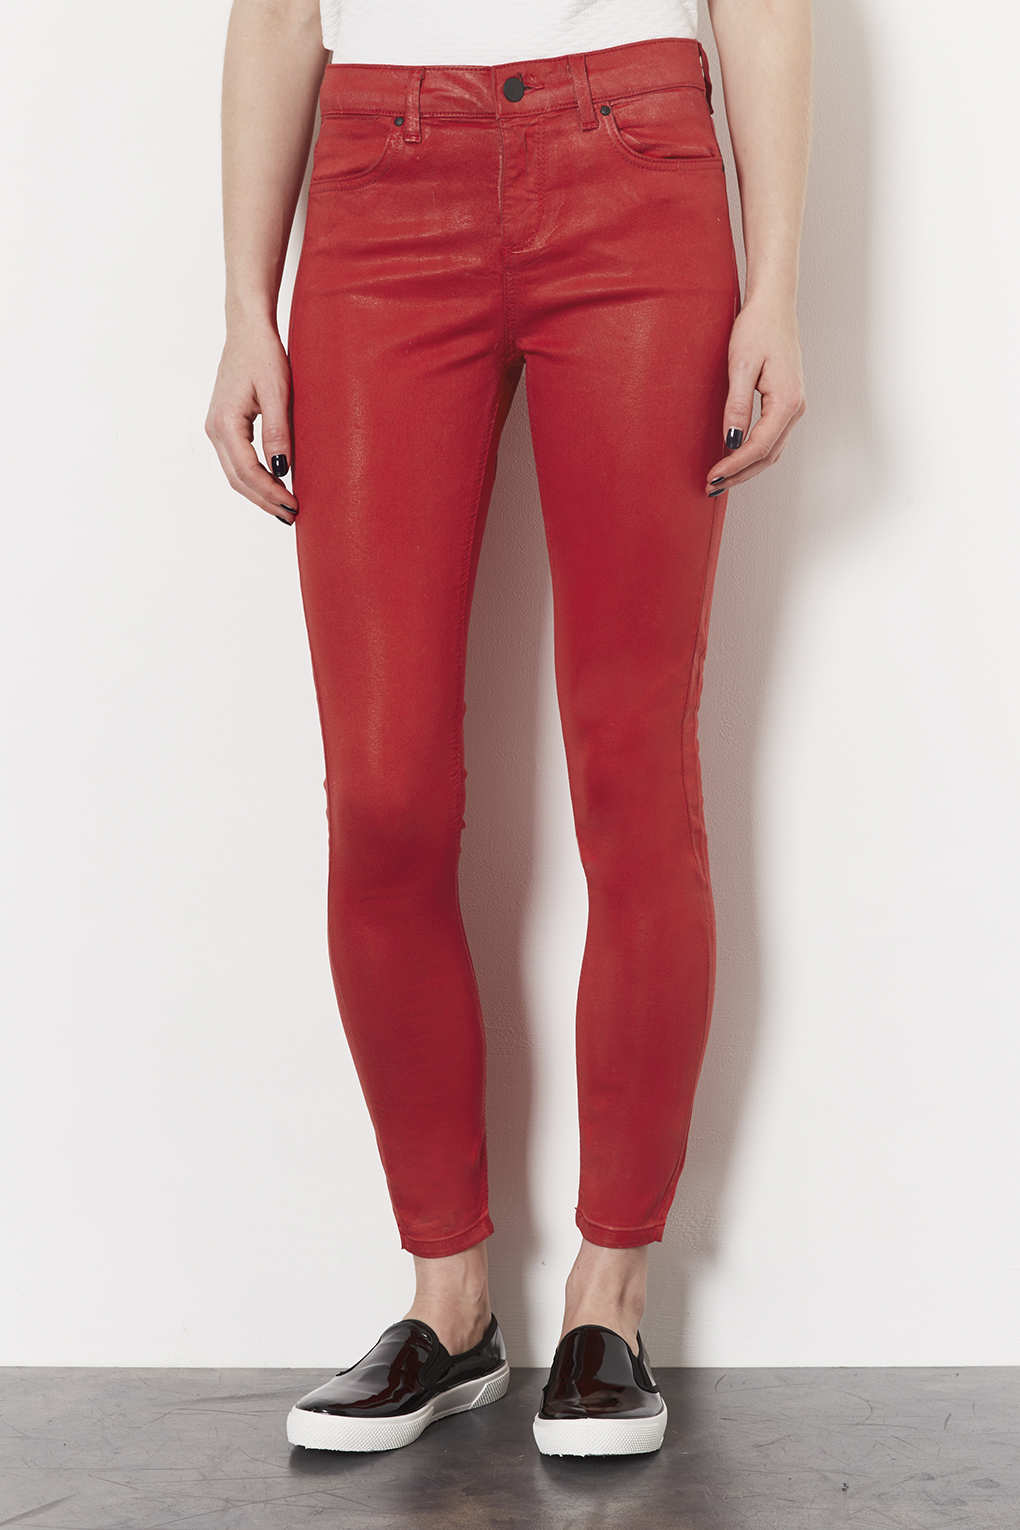 Lyst - Topshop Moto Red Coated Leigh Jeans in Red